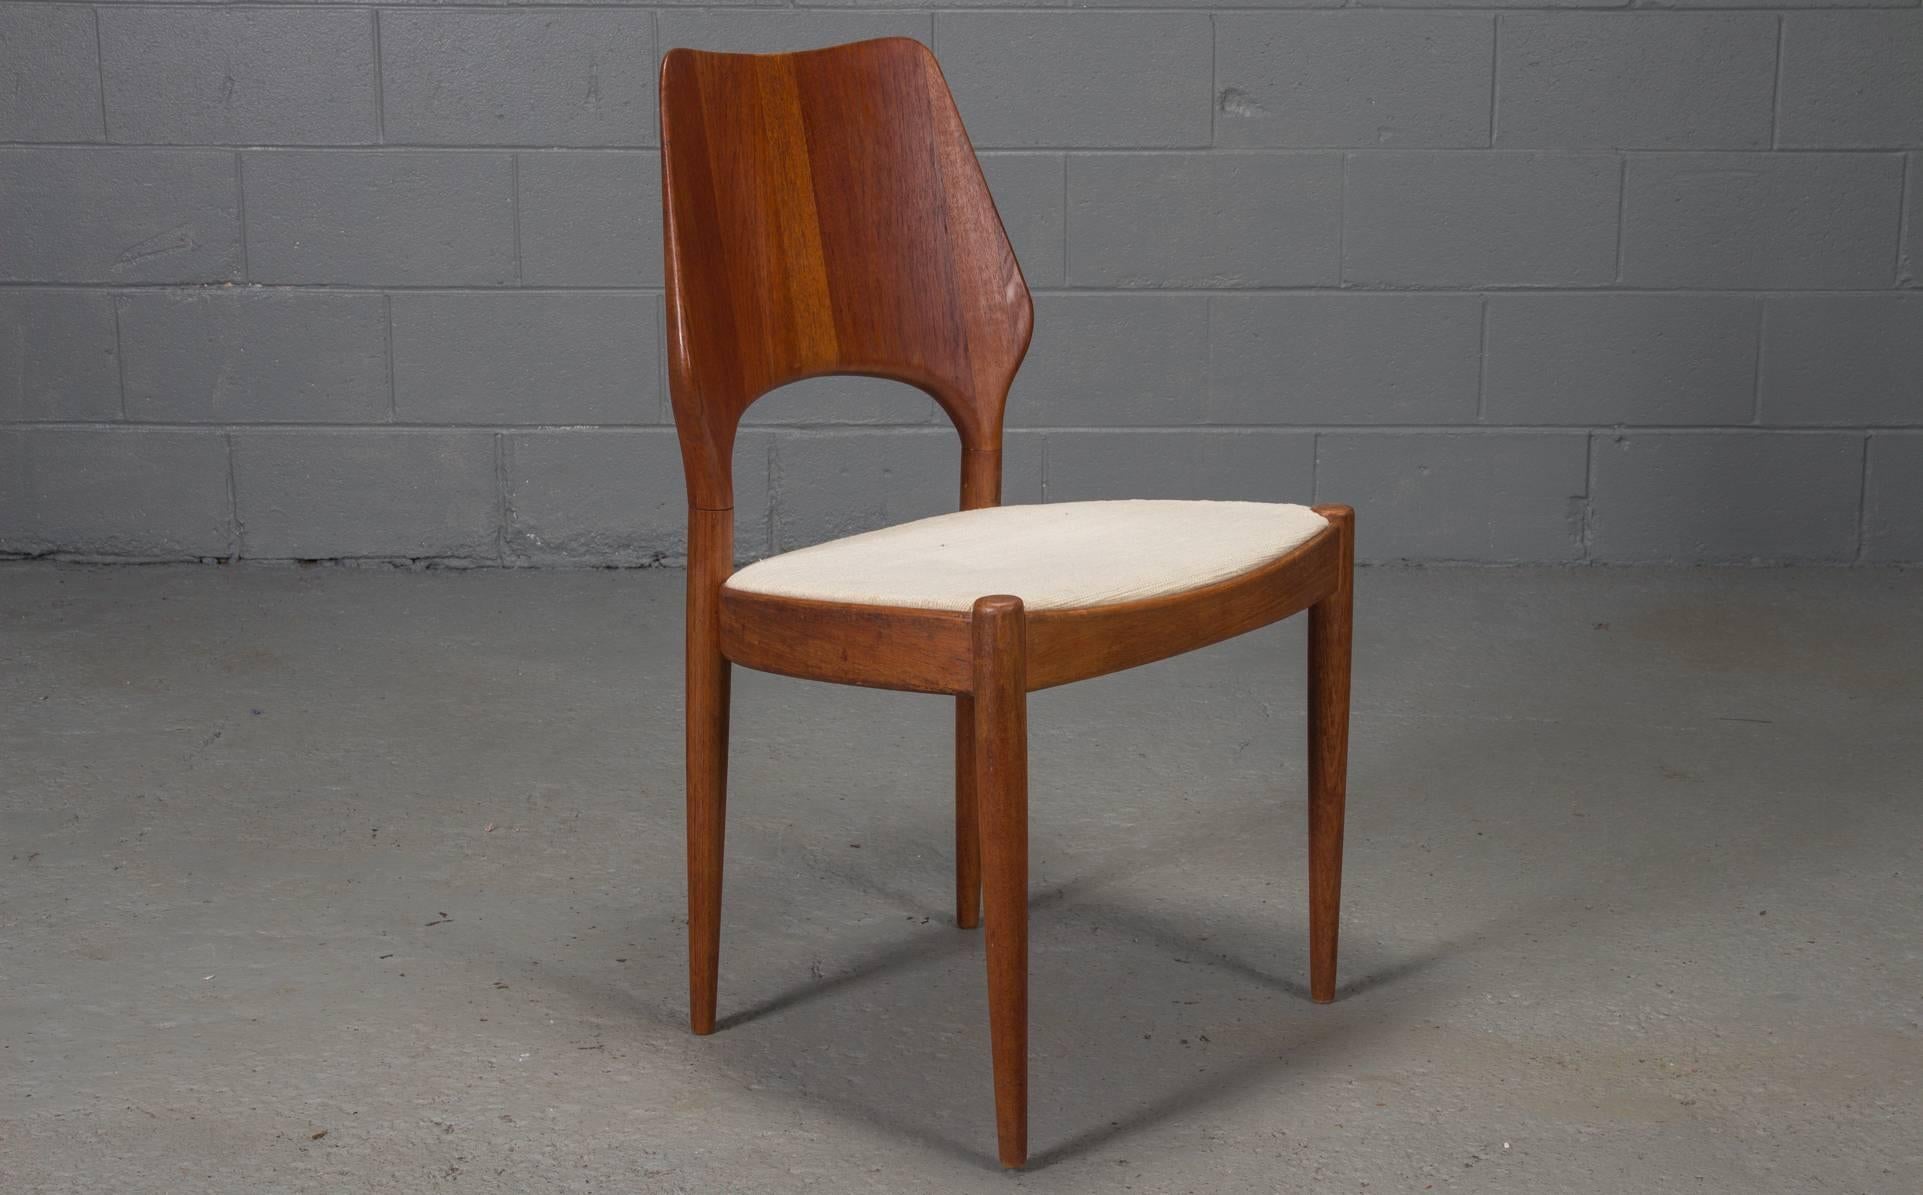 Set of four Danish modern solid teak finback dining chairs with metal Danish control label, 1950s.